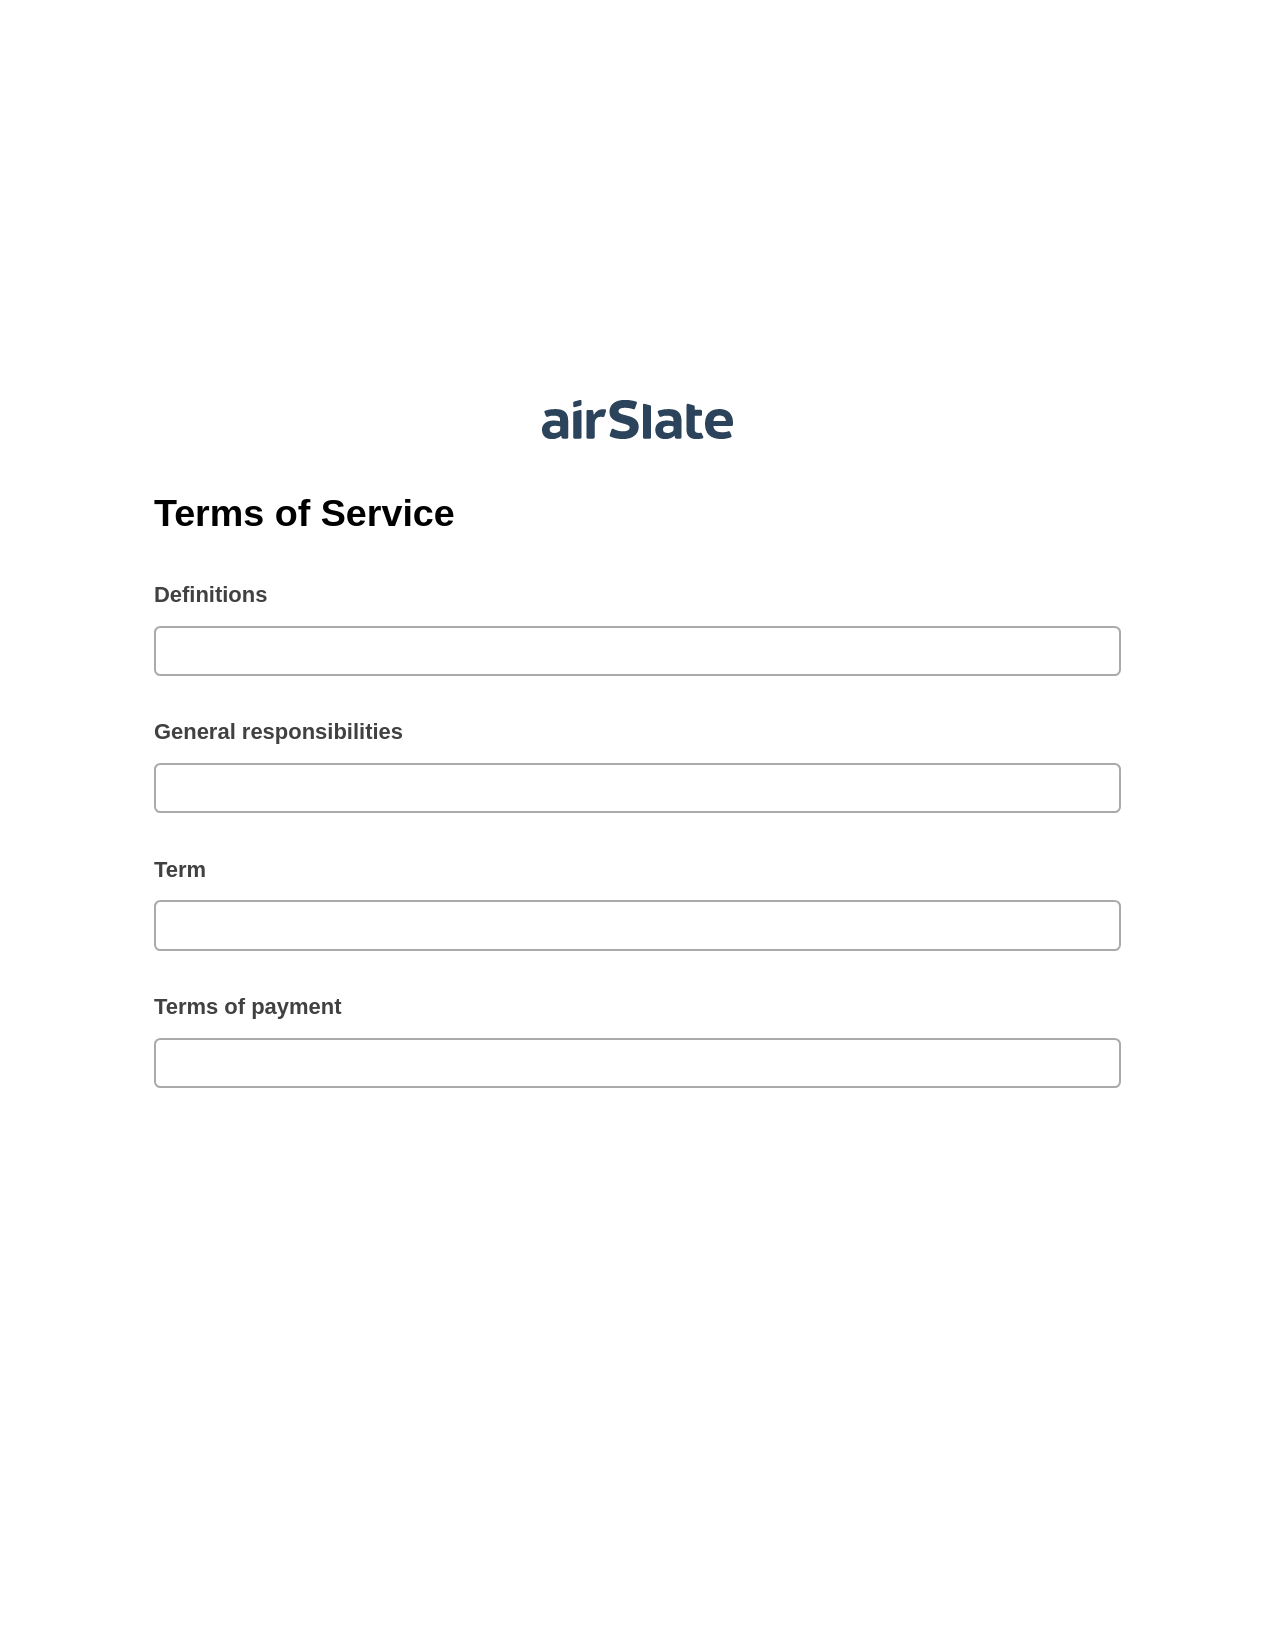 Multirole Terms of Service Pre-fill from CSV File Dropdown Options Bot, 1Create Slate every Google Sheet Update Bot, Archive to SharePoint Folder Bot